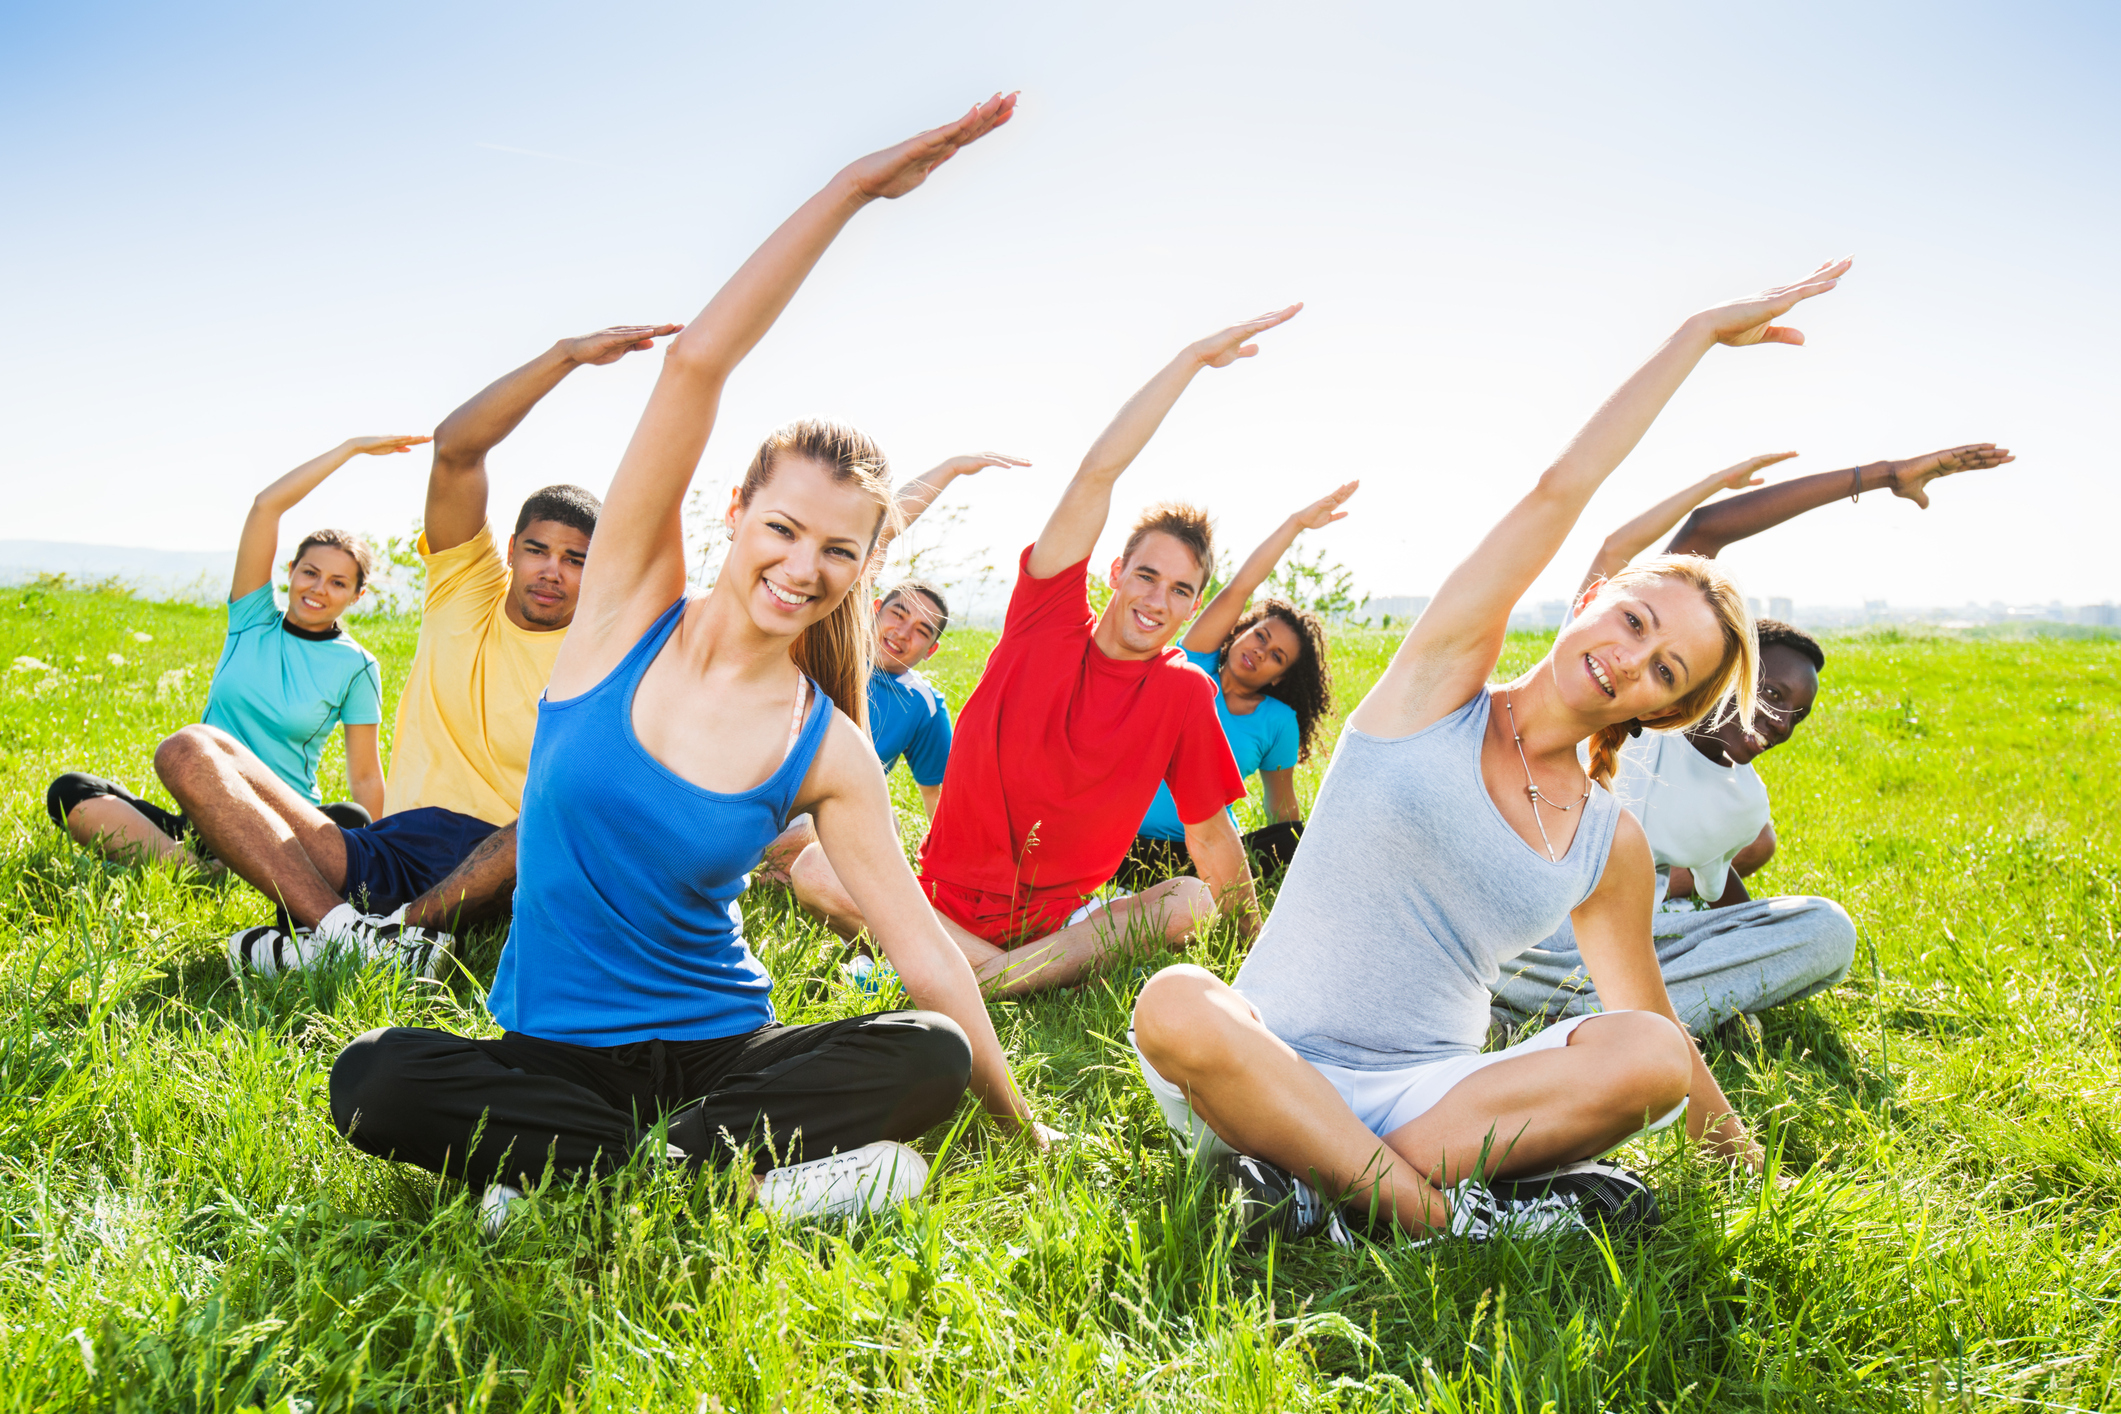 Yoga promotes wellbeing of teens with chronic pain